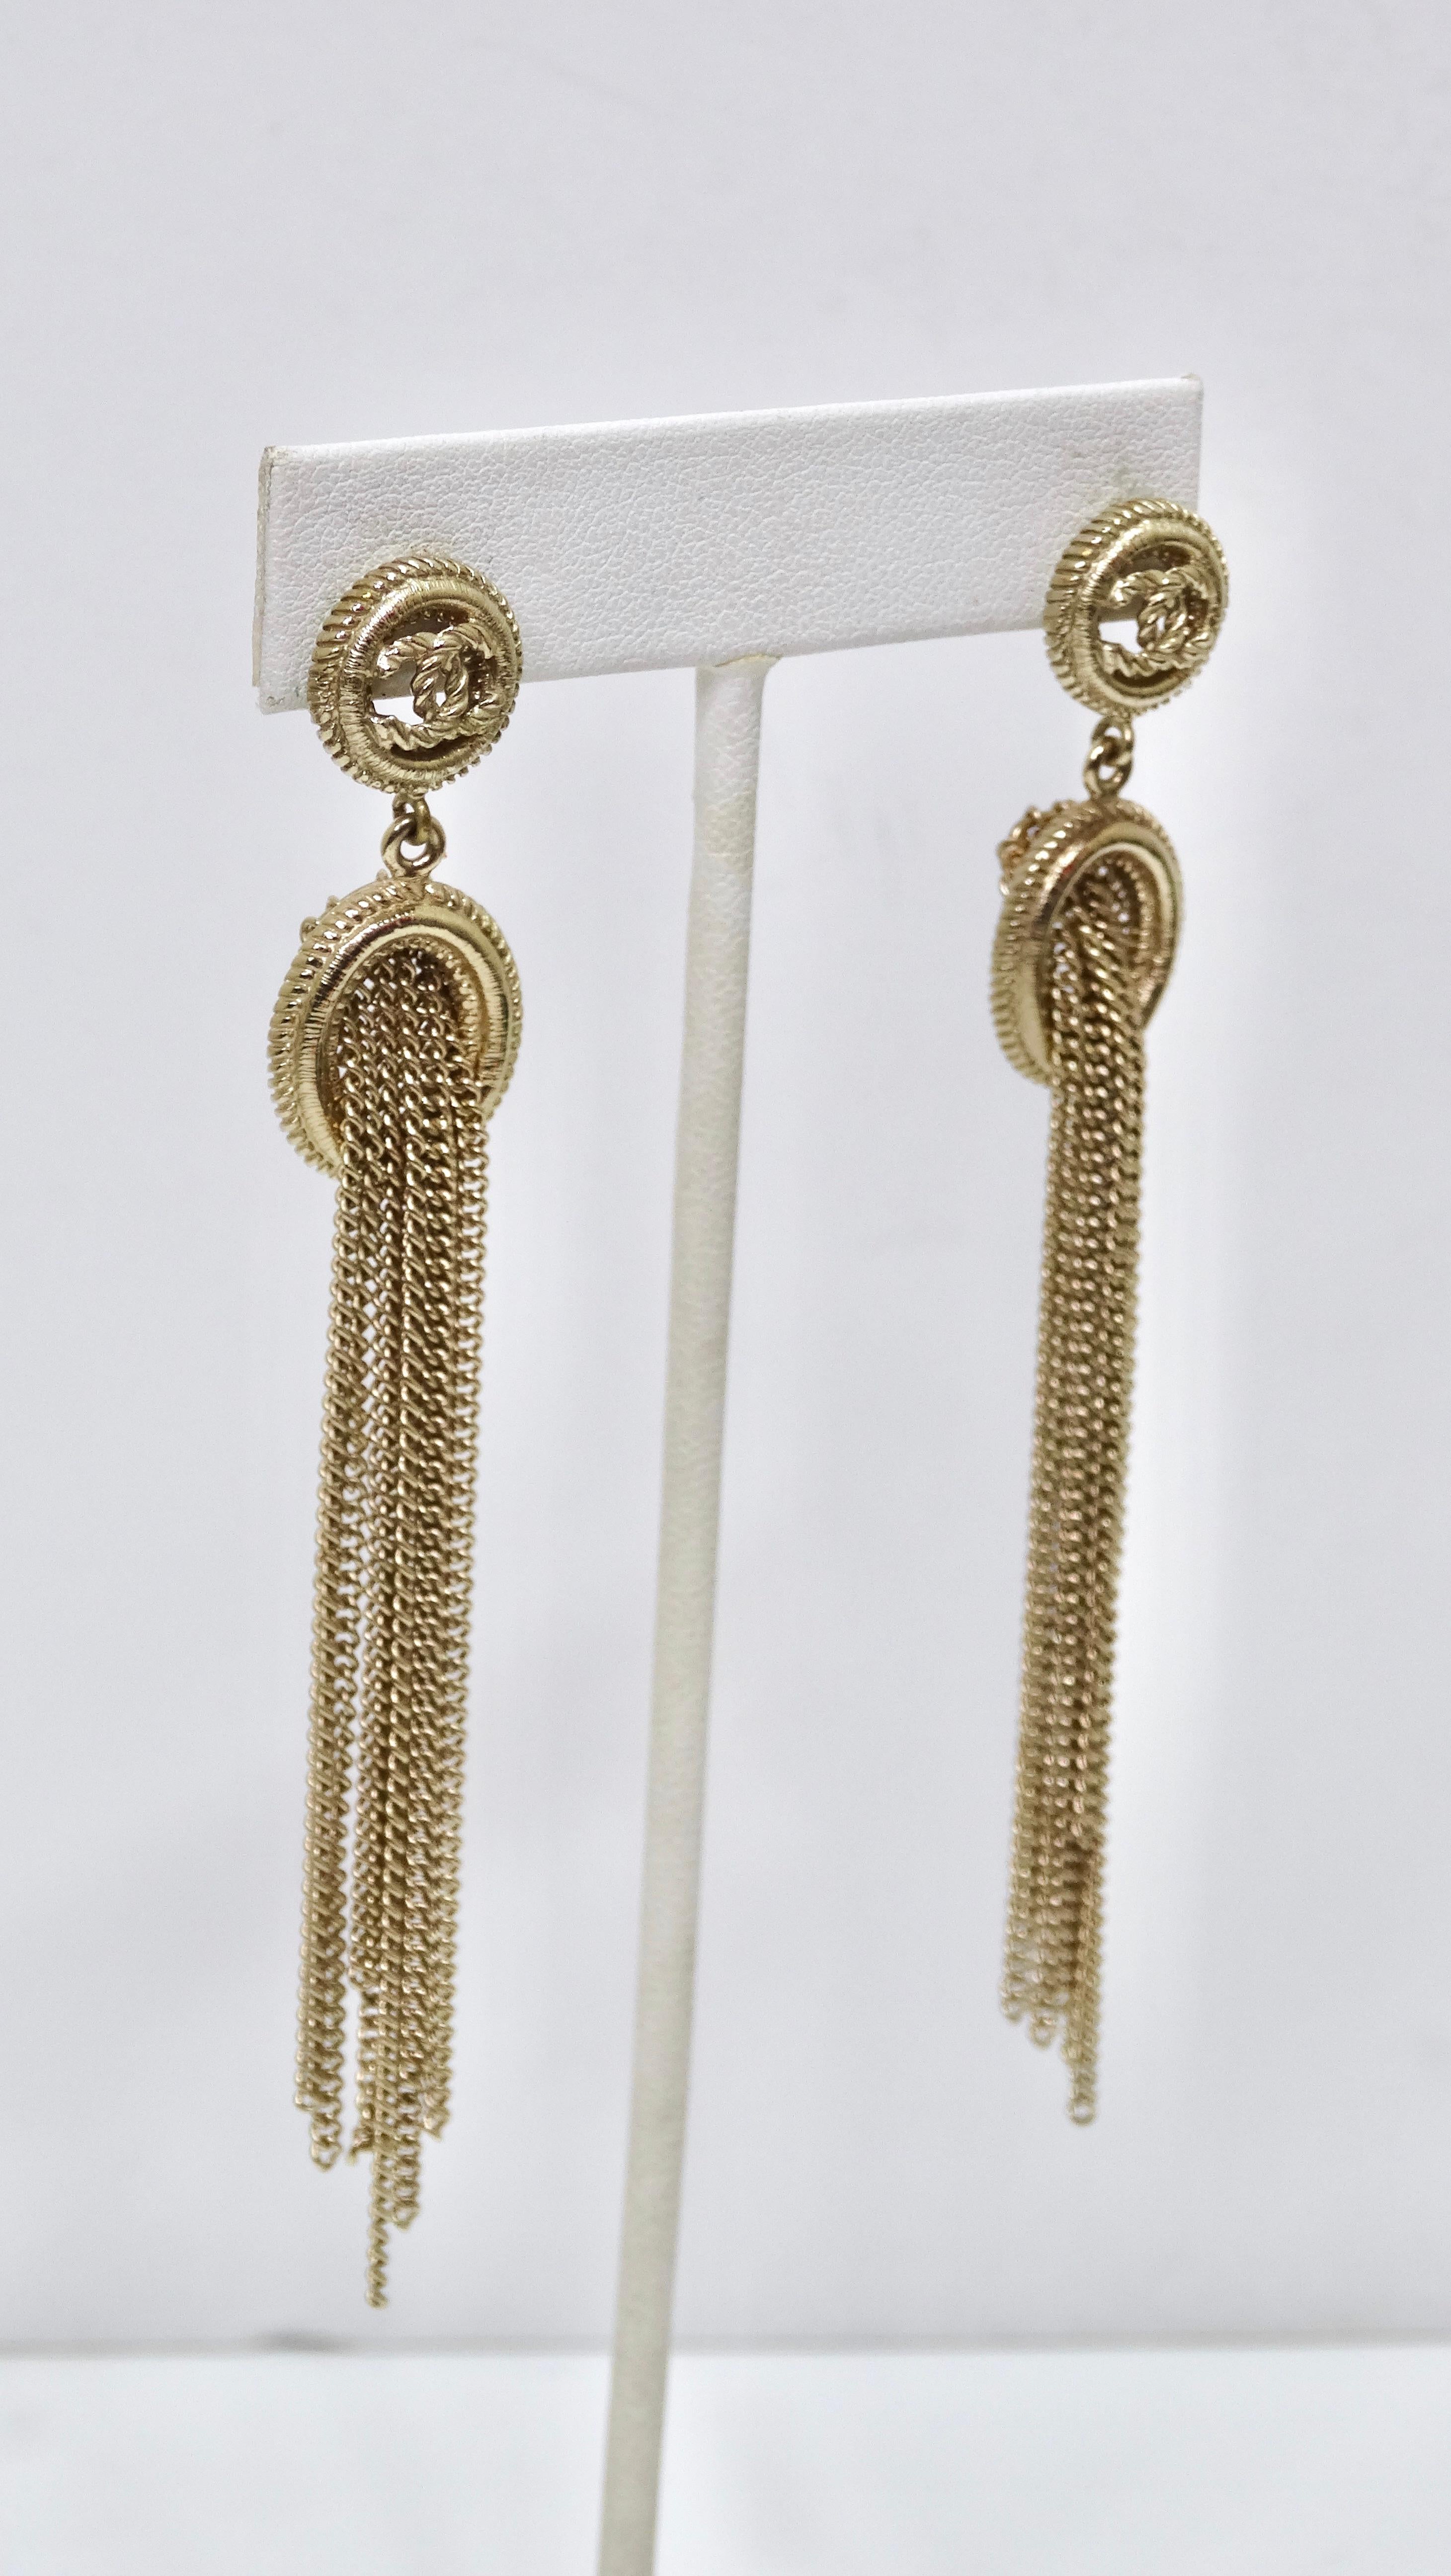 These are from a 2016 collection meant to upgrade your simple Chanel CC earrings to a fun and edgy pair of art perfect for a night out! This is a very rare piece of Chanel with a vintage feel to add to your collection today. You will not be able to